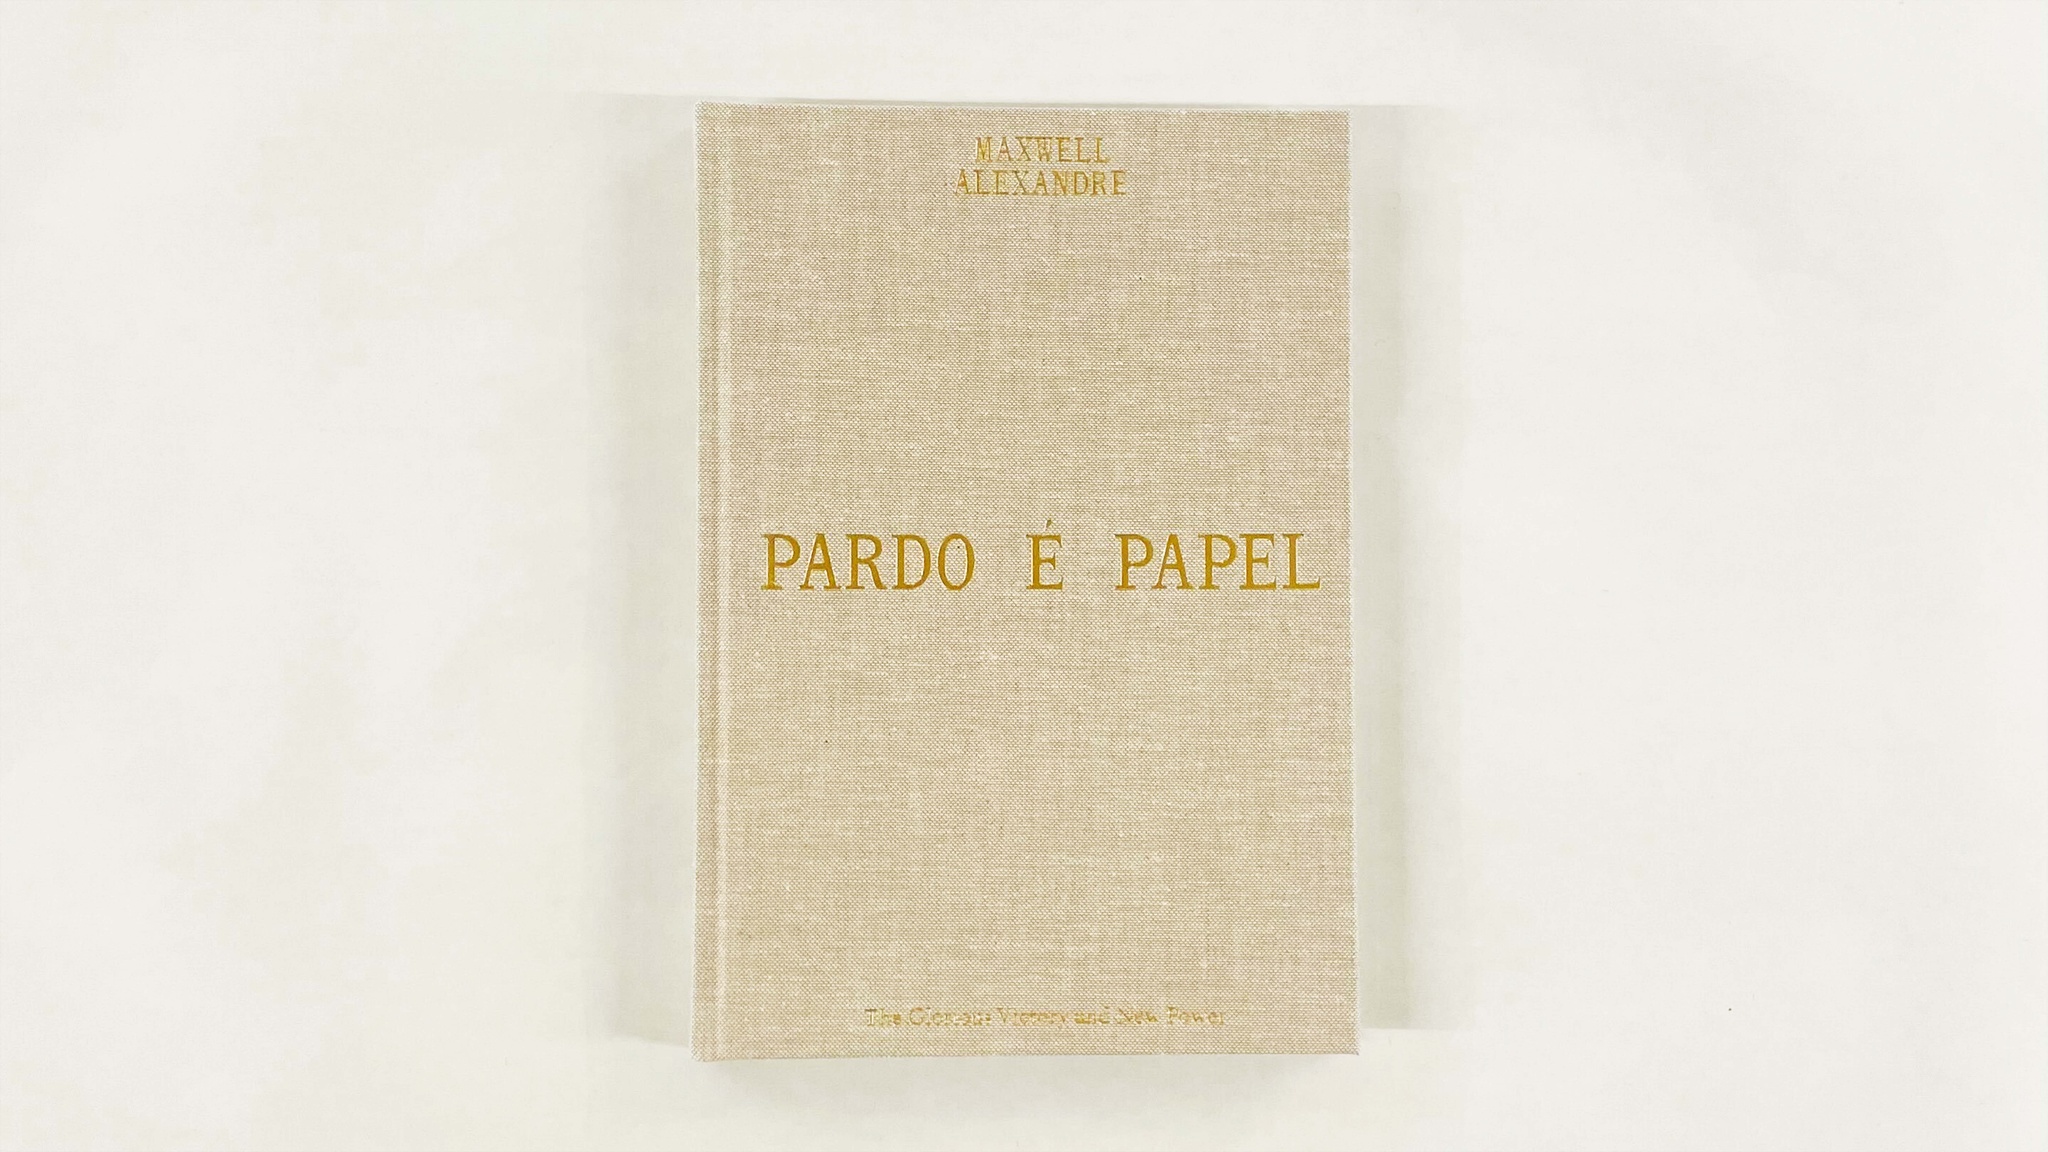 An exhibition catalogue with a hardback cover in tan-colored cloth. The cover reads Maxwell Alexandre, Pardo é Papel in gold letters. 